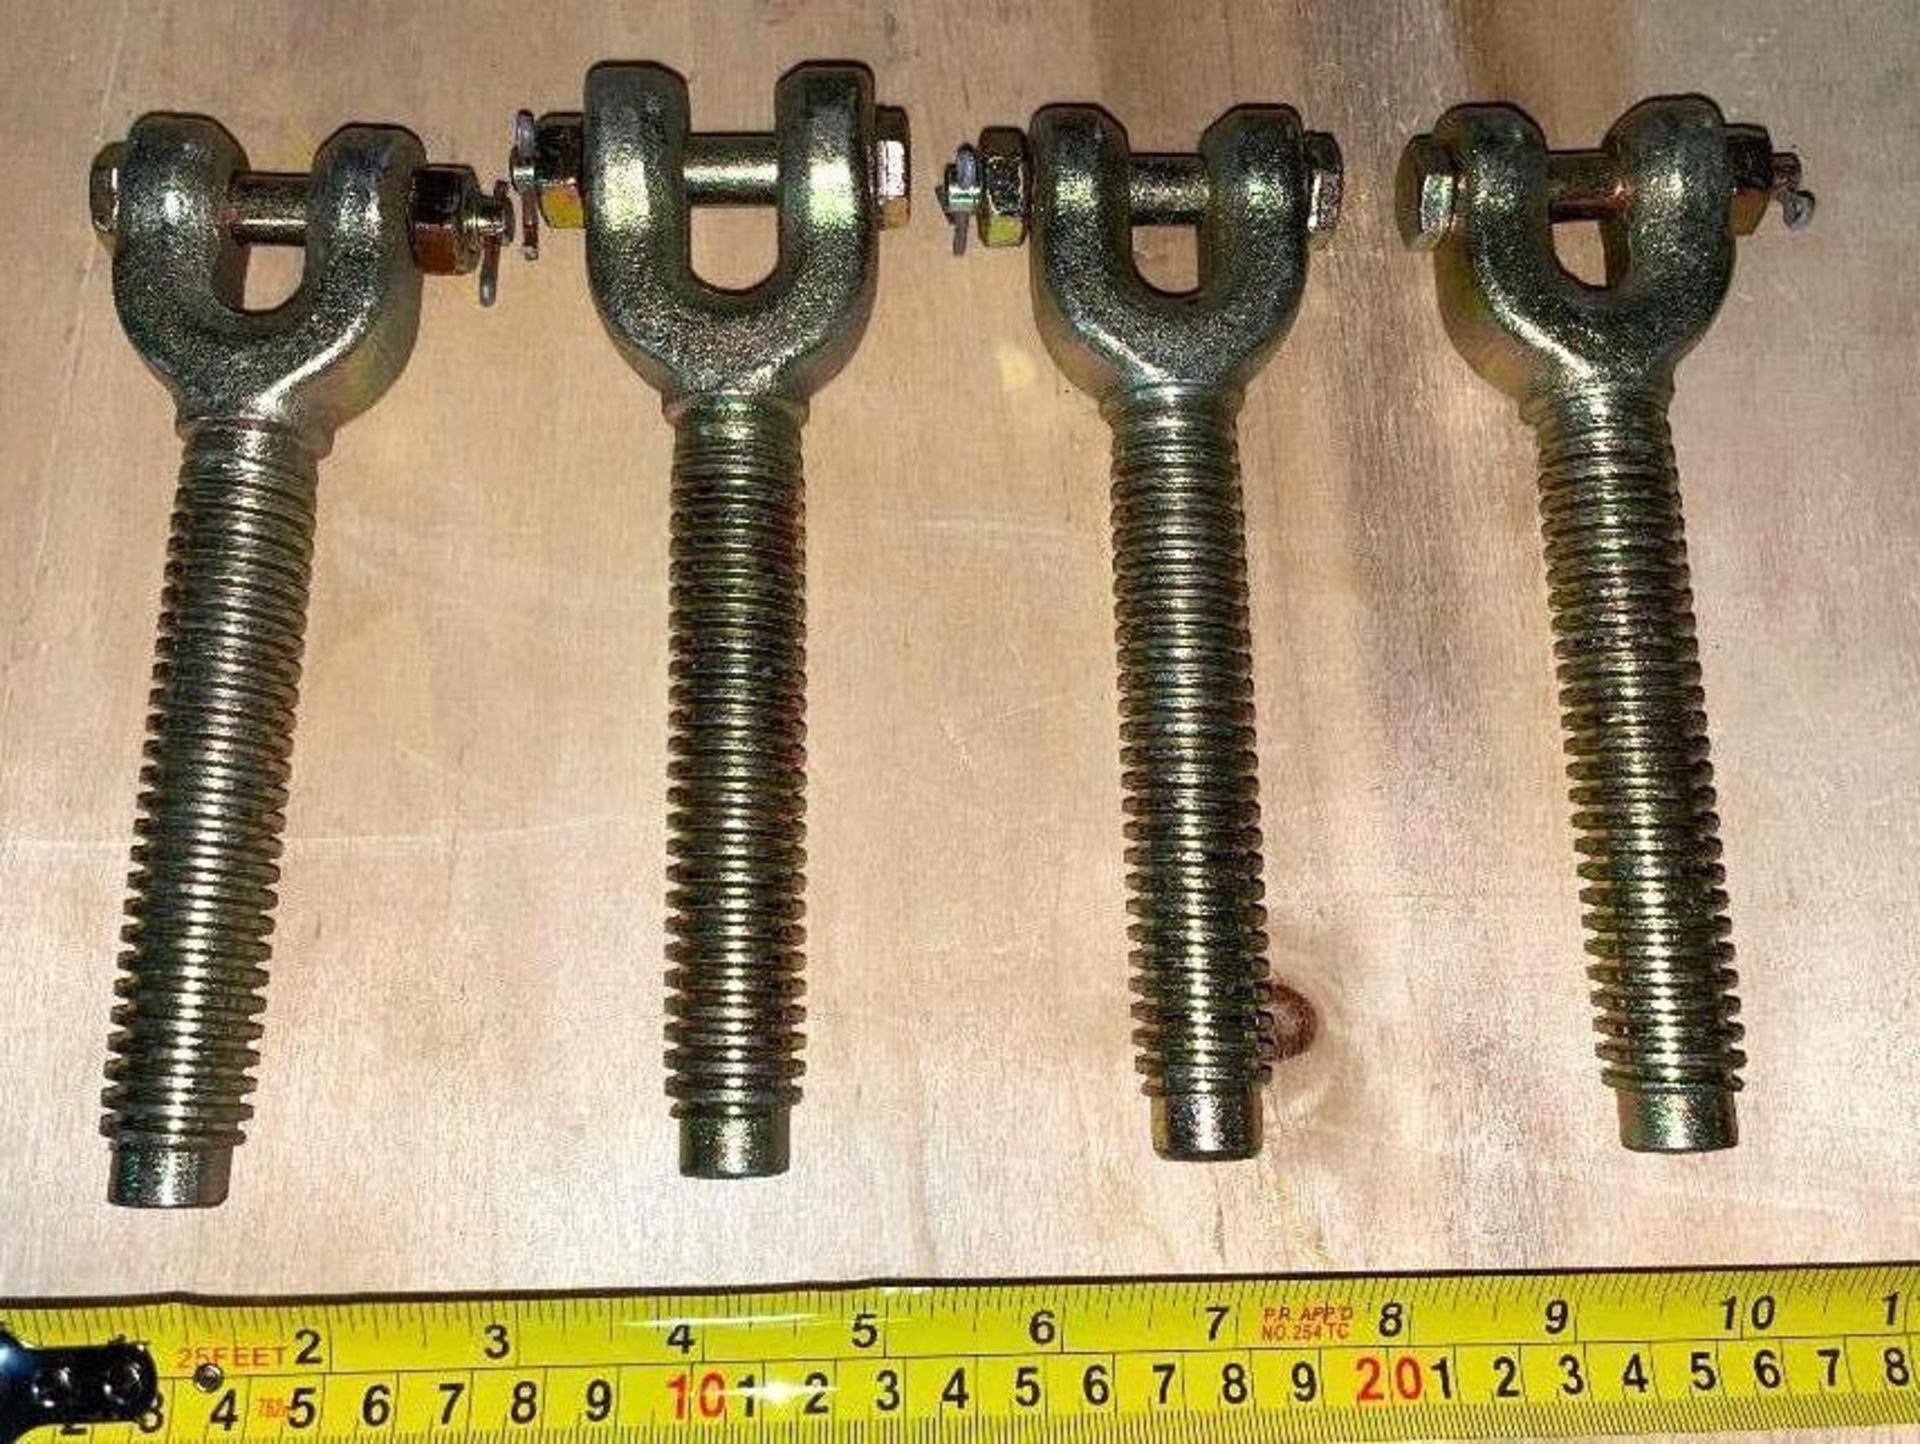 DESCRIPTION: (400) 7" TURNBUCKLE END BOLTS W/ 1" CLEVIS ADDITIONAL INFORMATION RETAILS FOR $7.50 EAC - Image 2 of 8